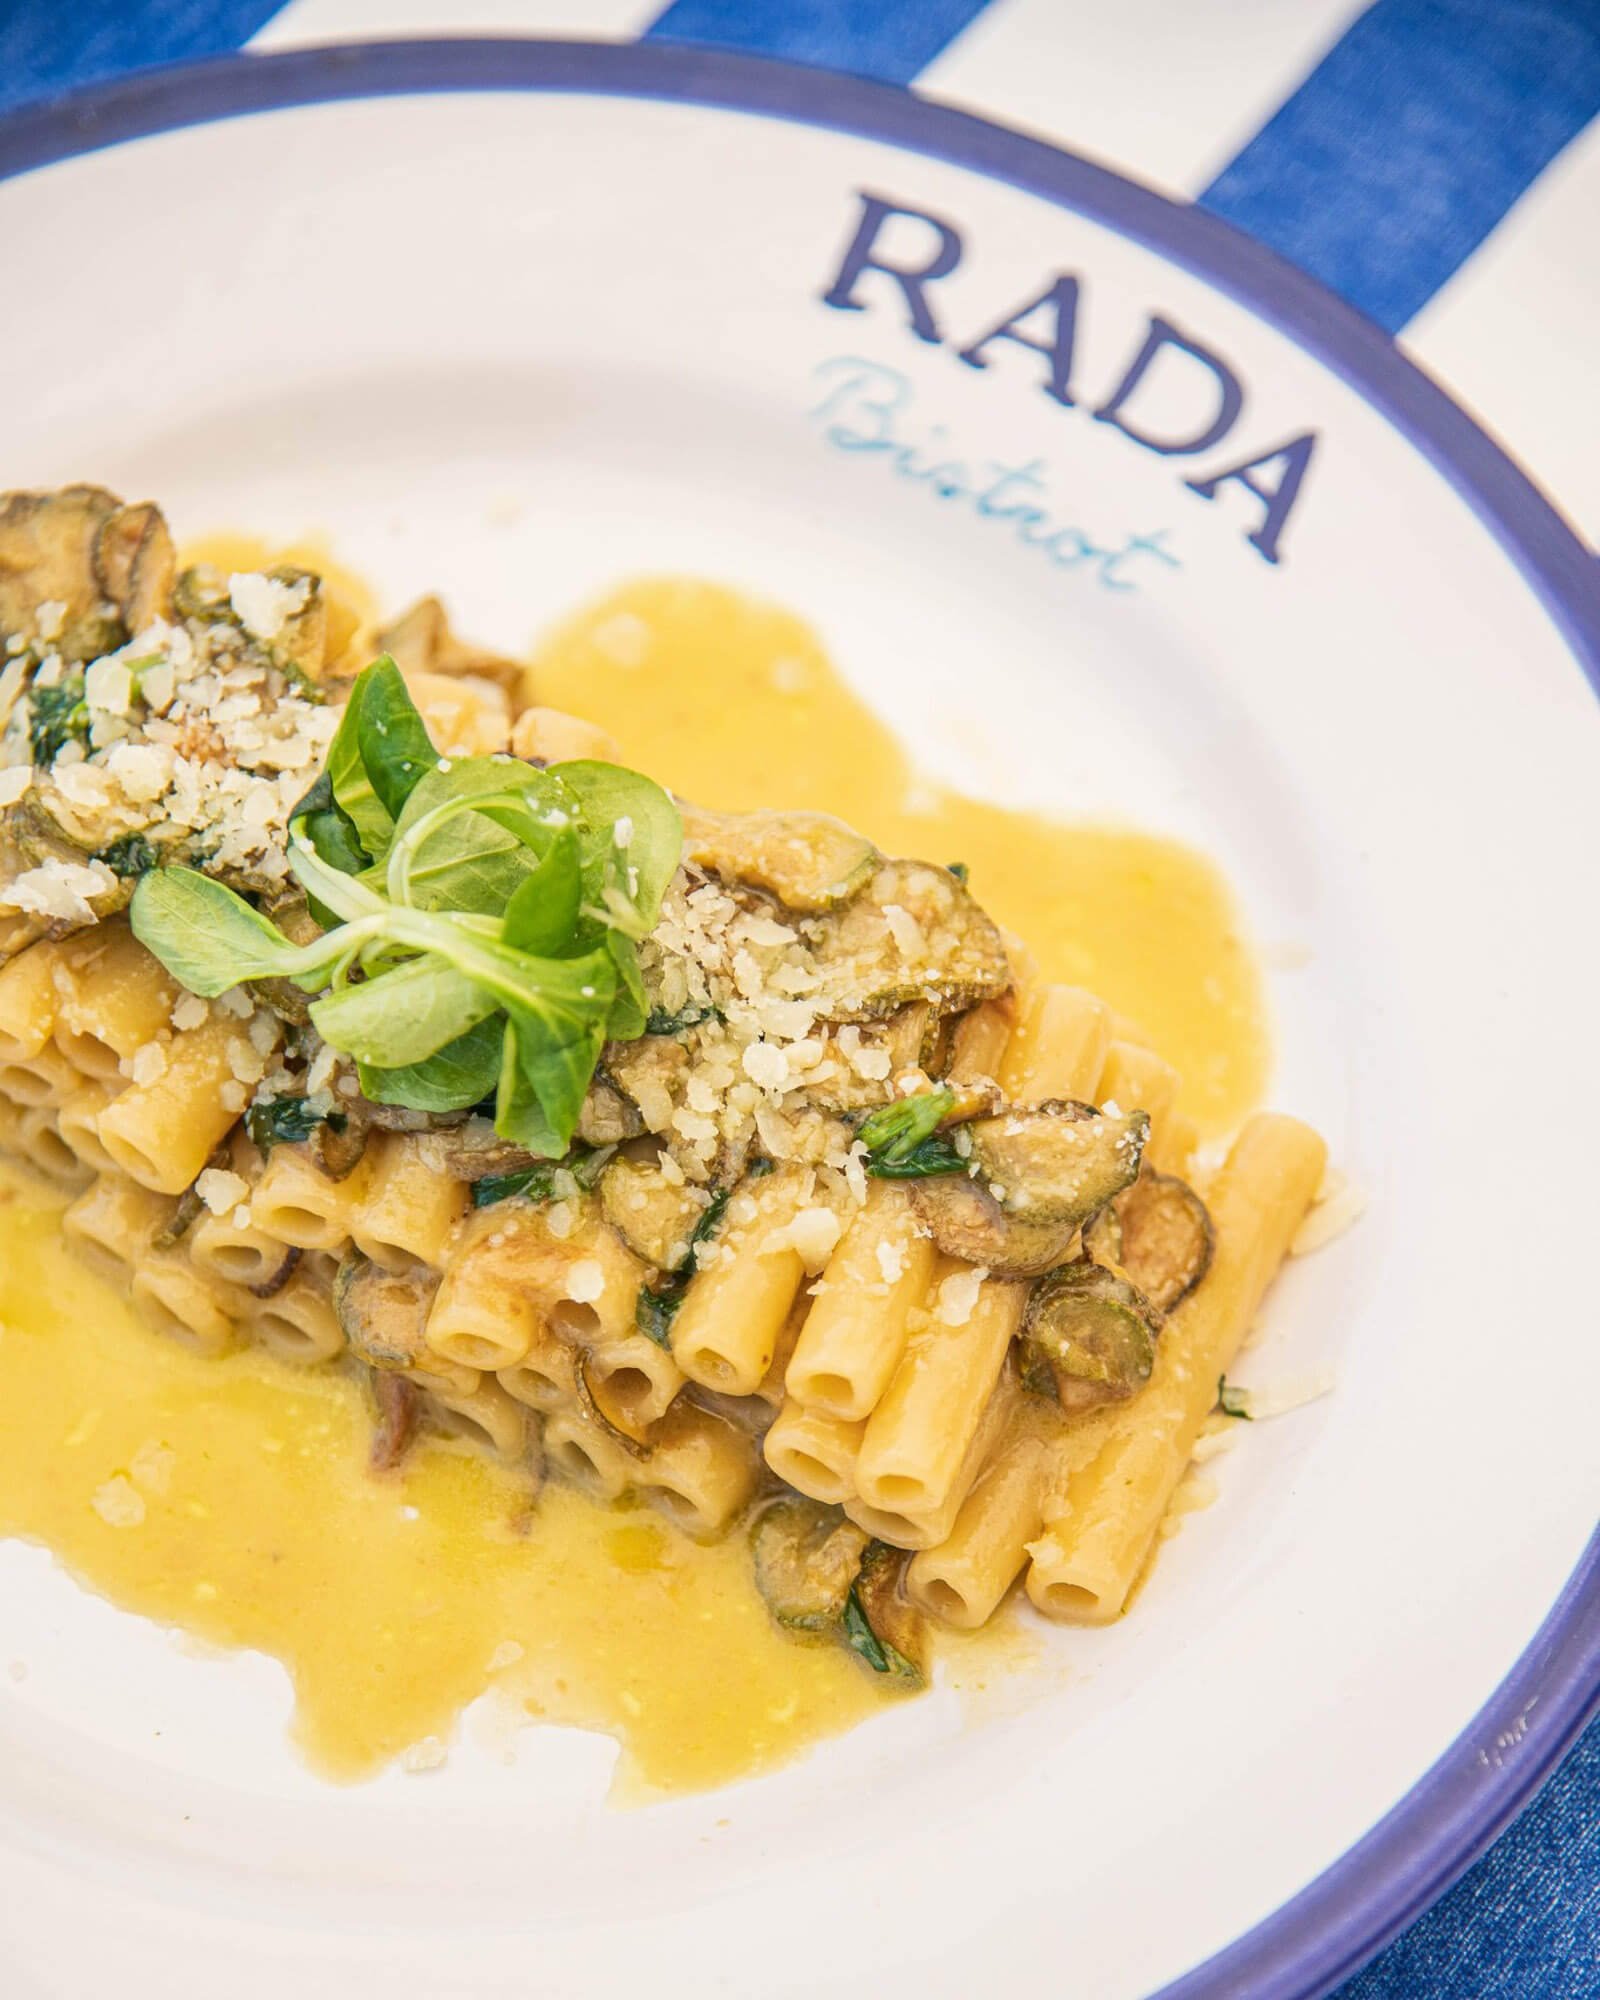 Rada Beach Bistrot is a high-end Italian restaurant at the end of the main beach, offering the best views of the Marina Grande beach and Positano.